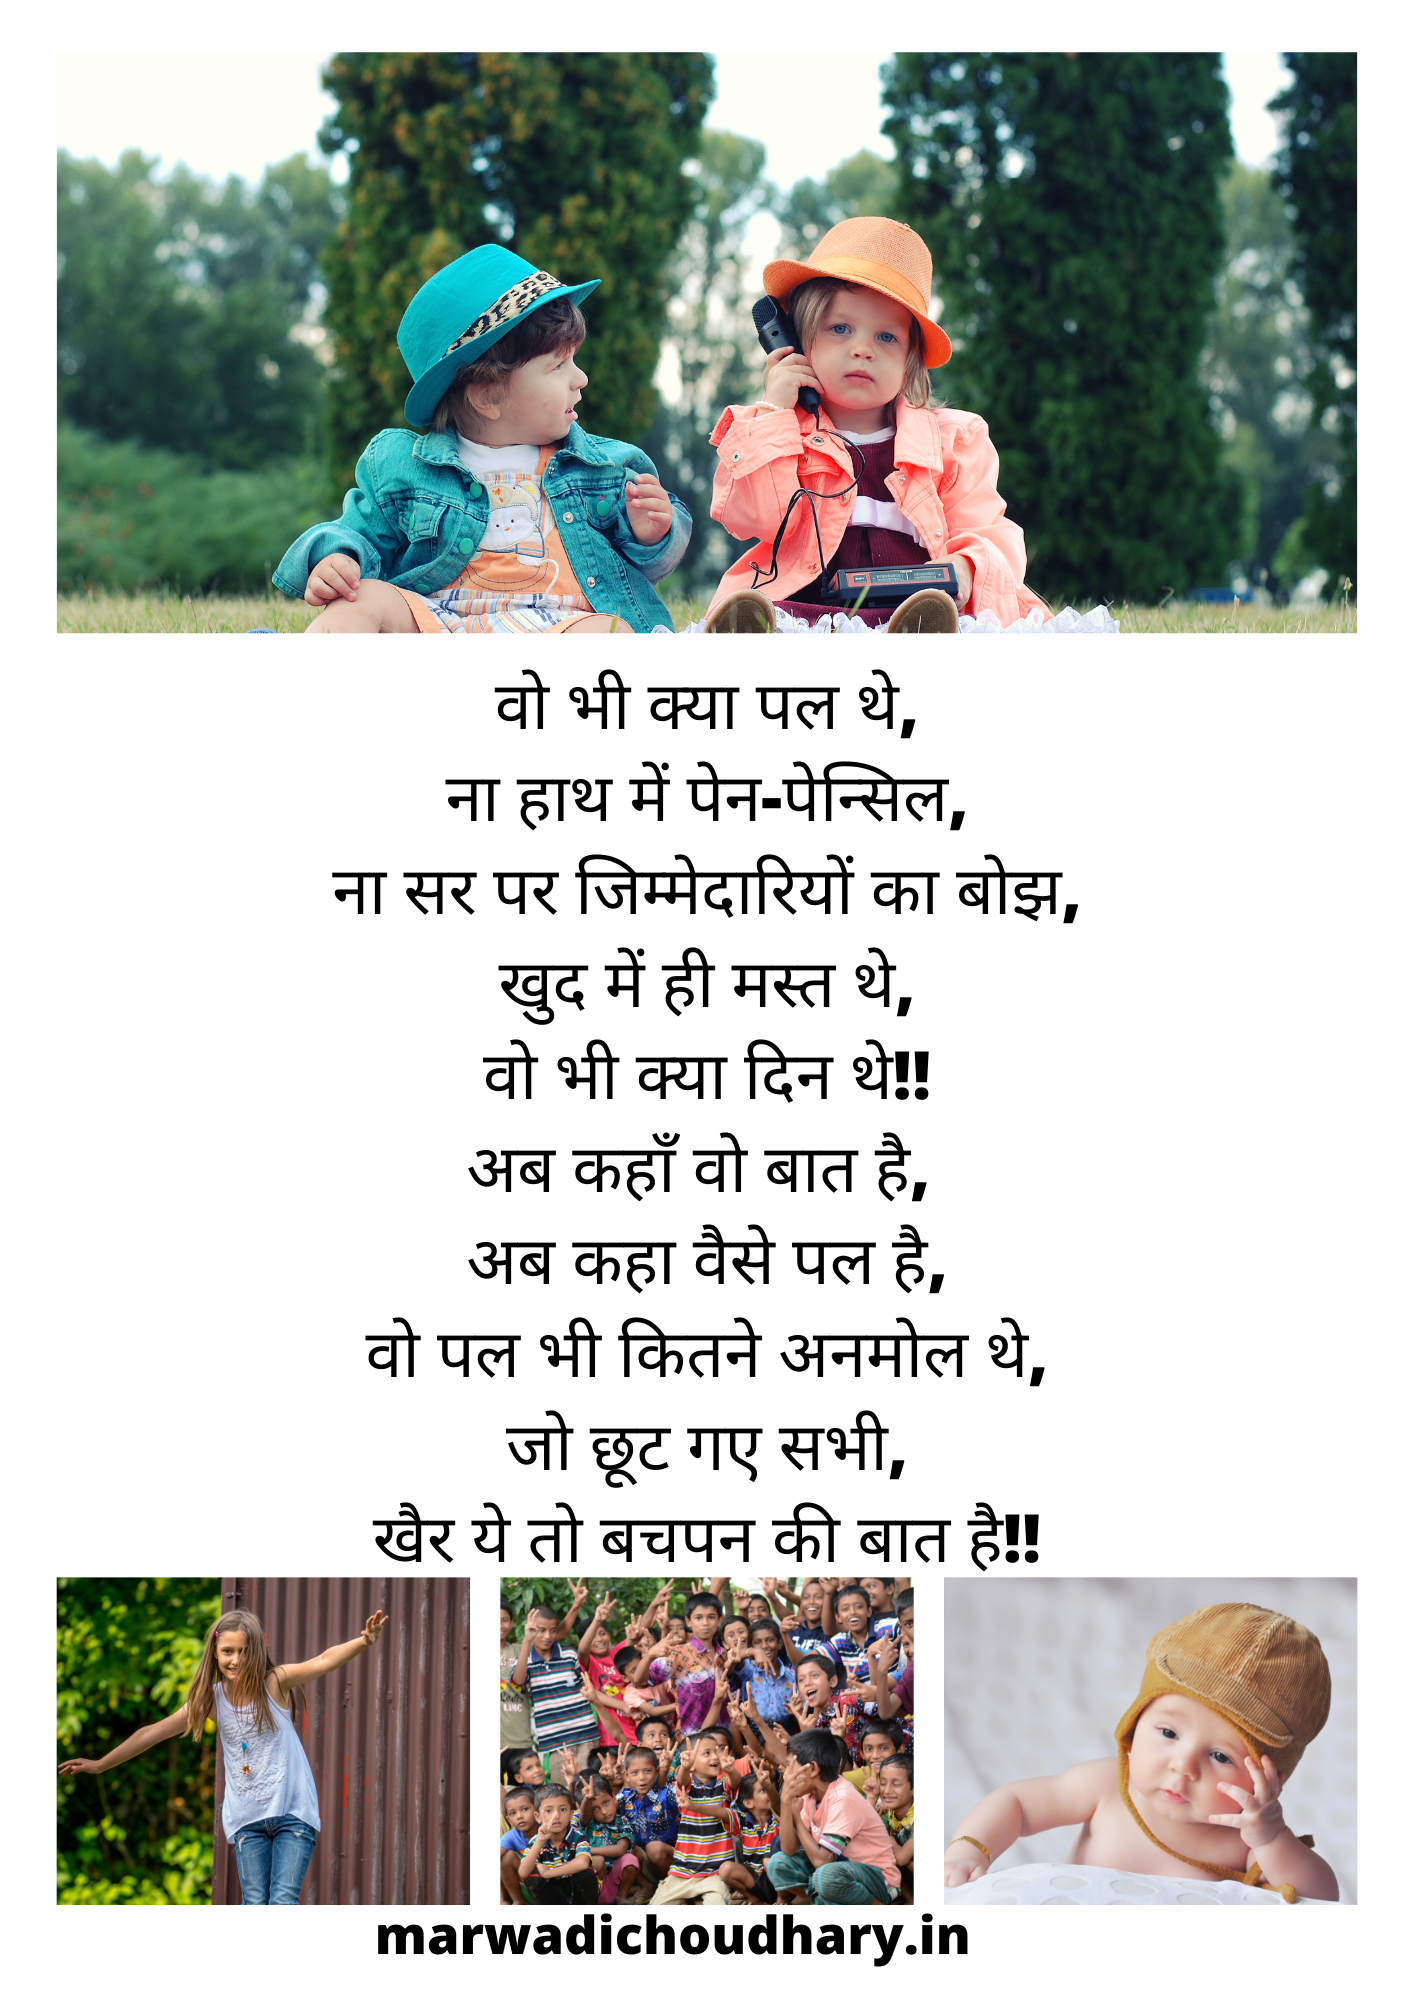 Poem About Childhood